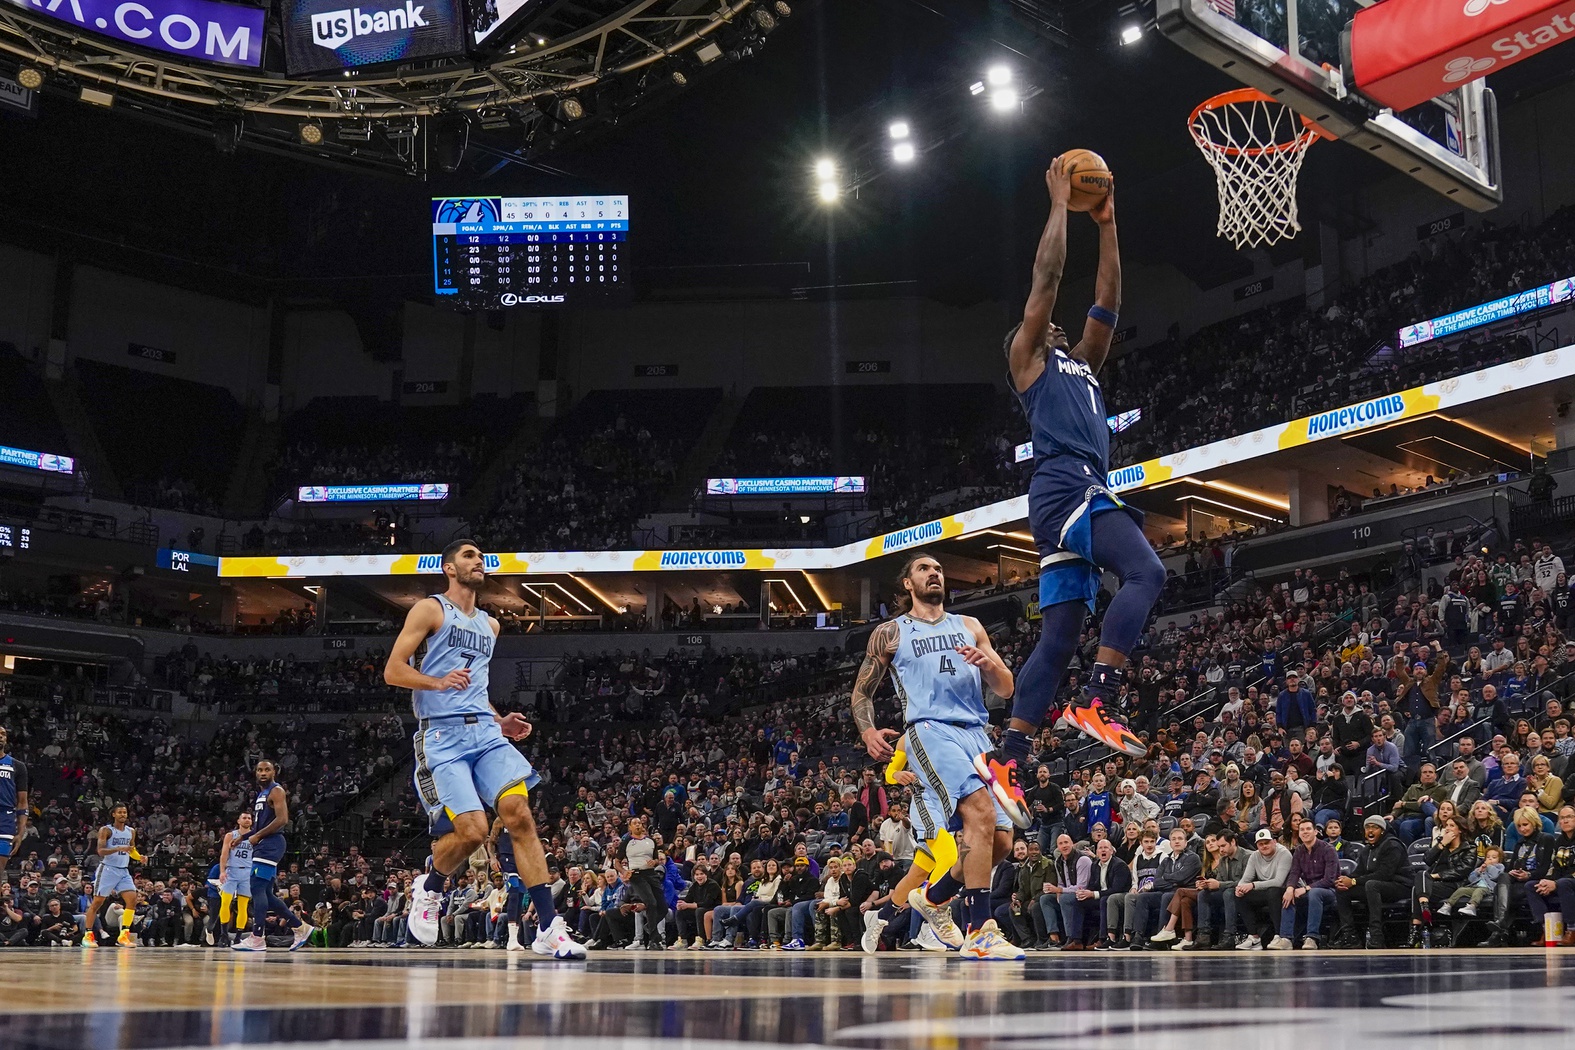 Ant’s 4th quarter, defense leads Timberwolves over Memphis